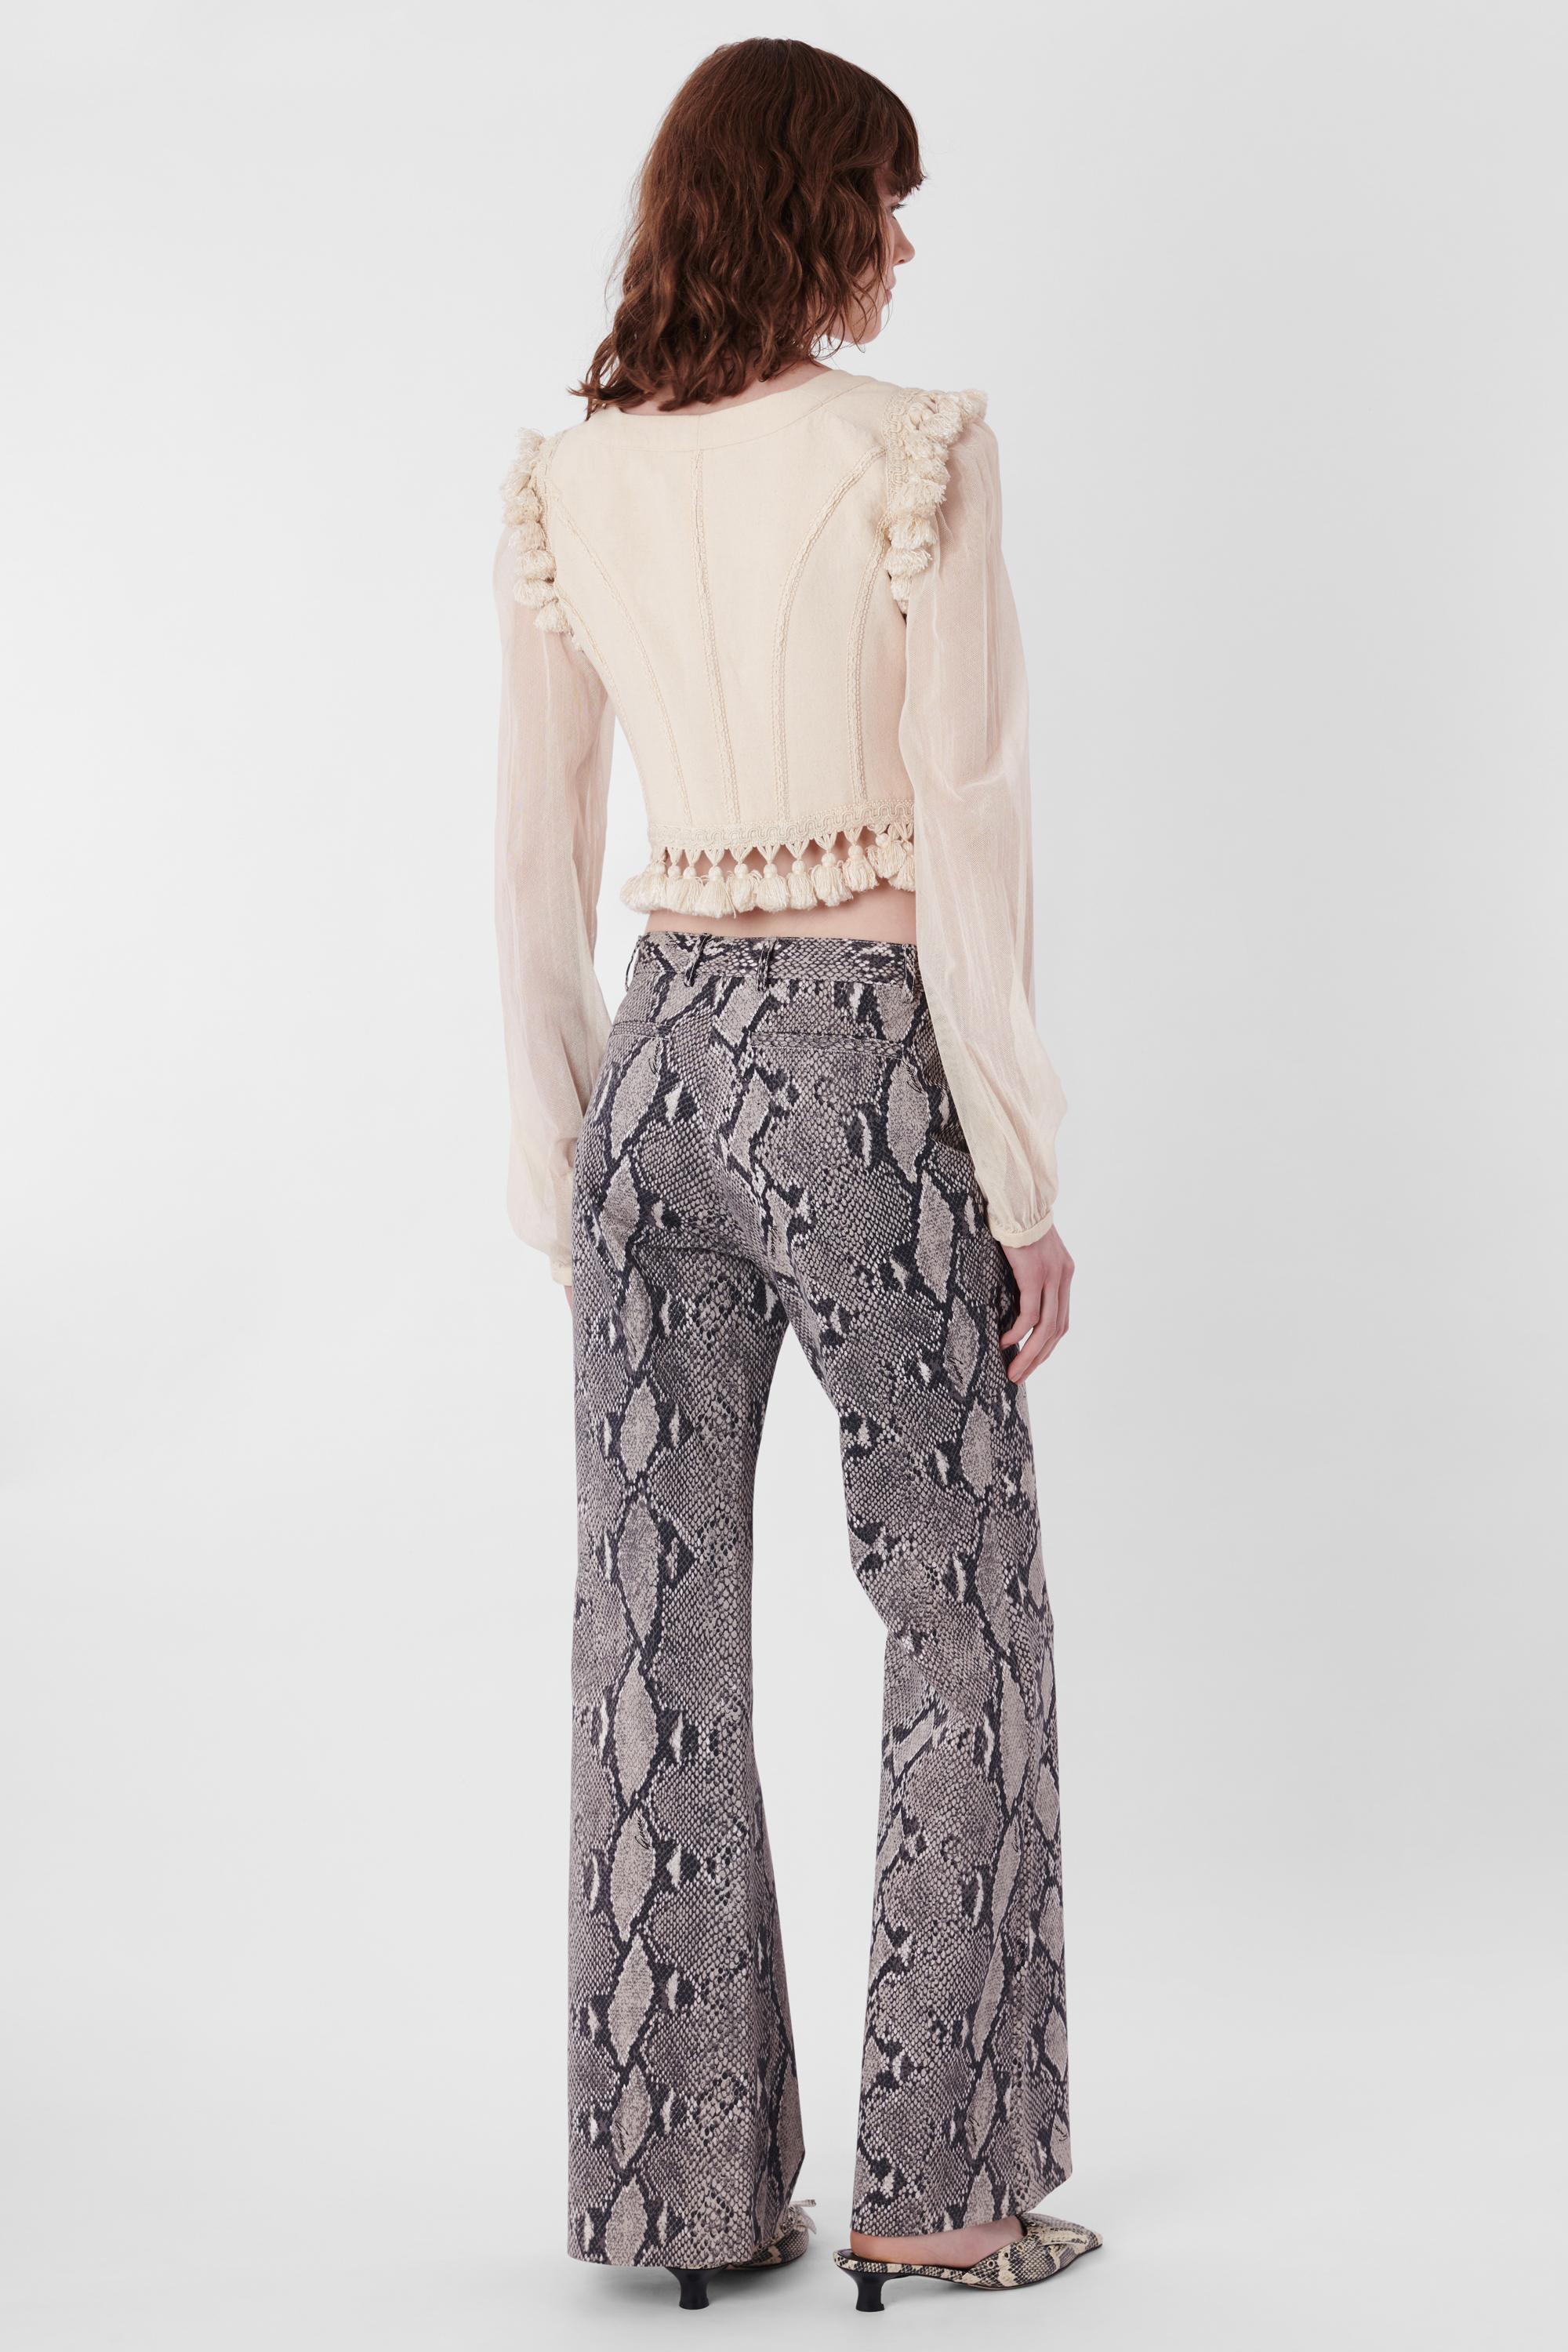 Gucci Vintage S/S 2000 Python Print Trousers In Excellent Condition For Sale In London, GB